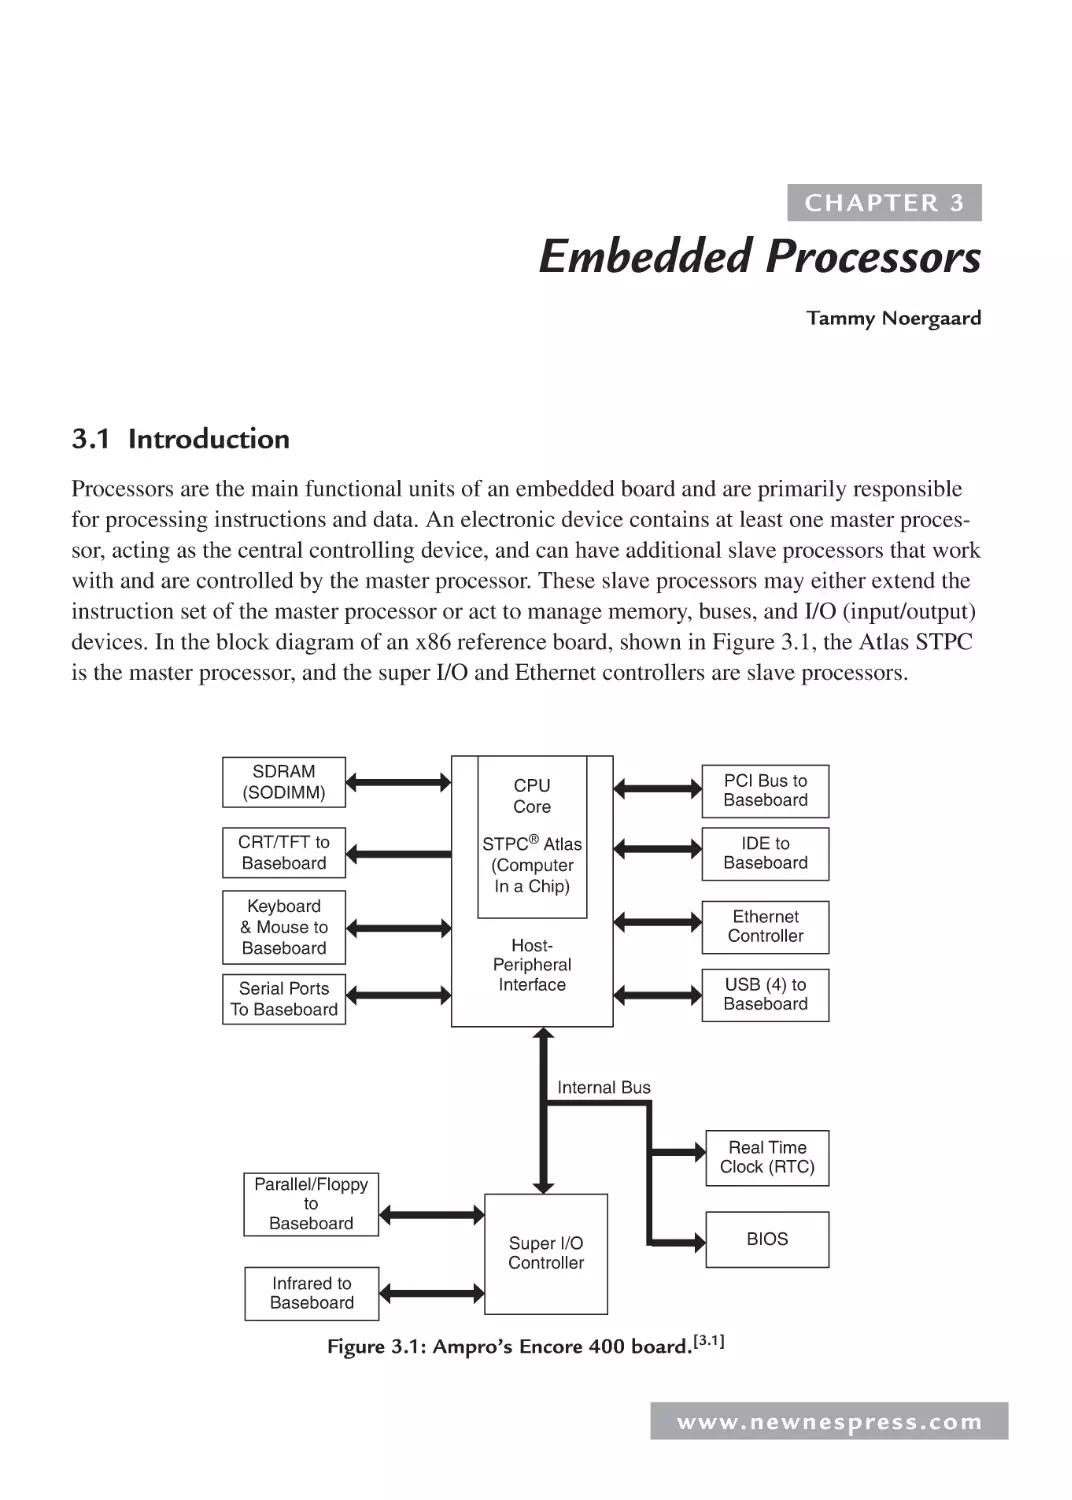 3 Embedded Processors
3.1 Introduction